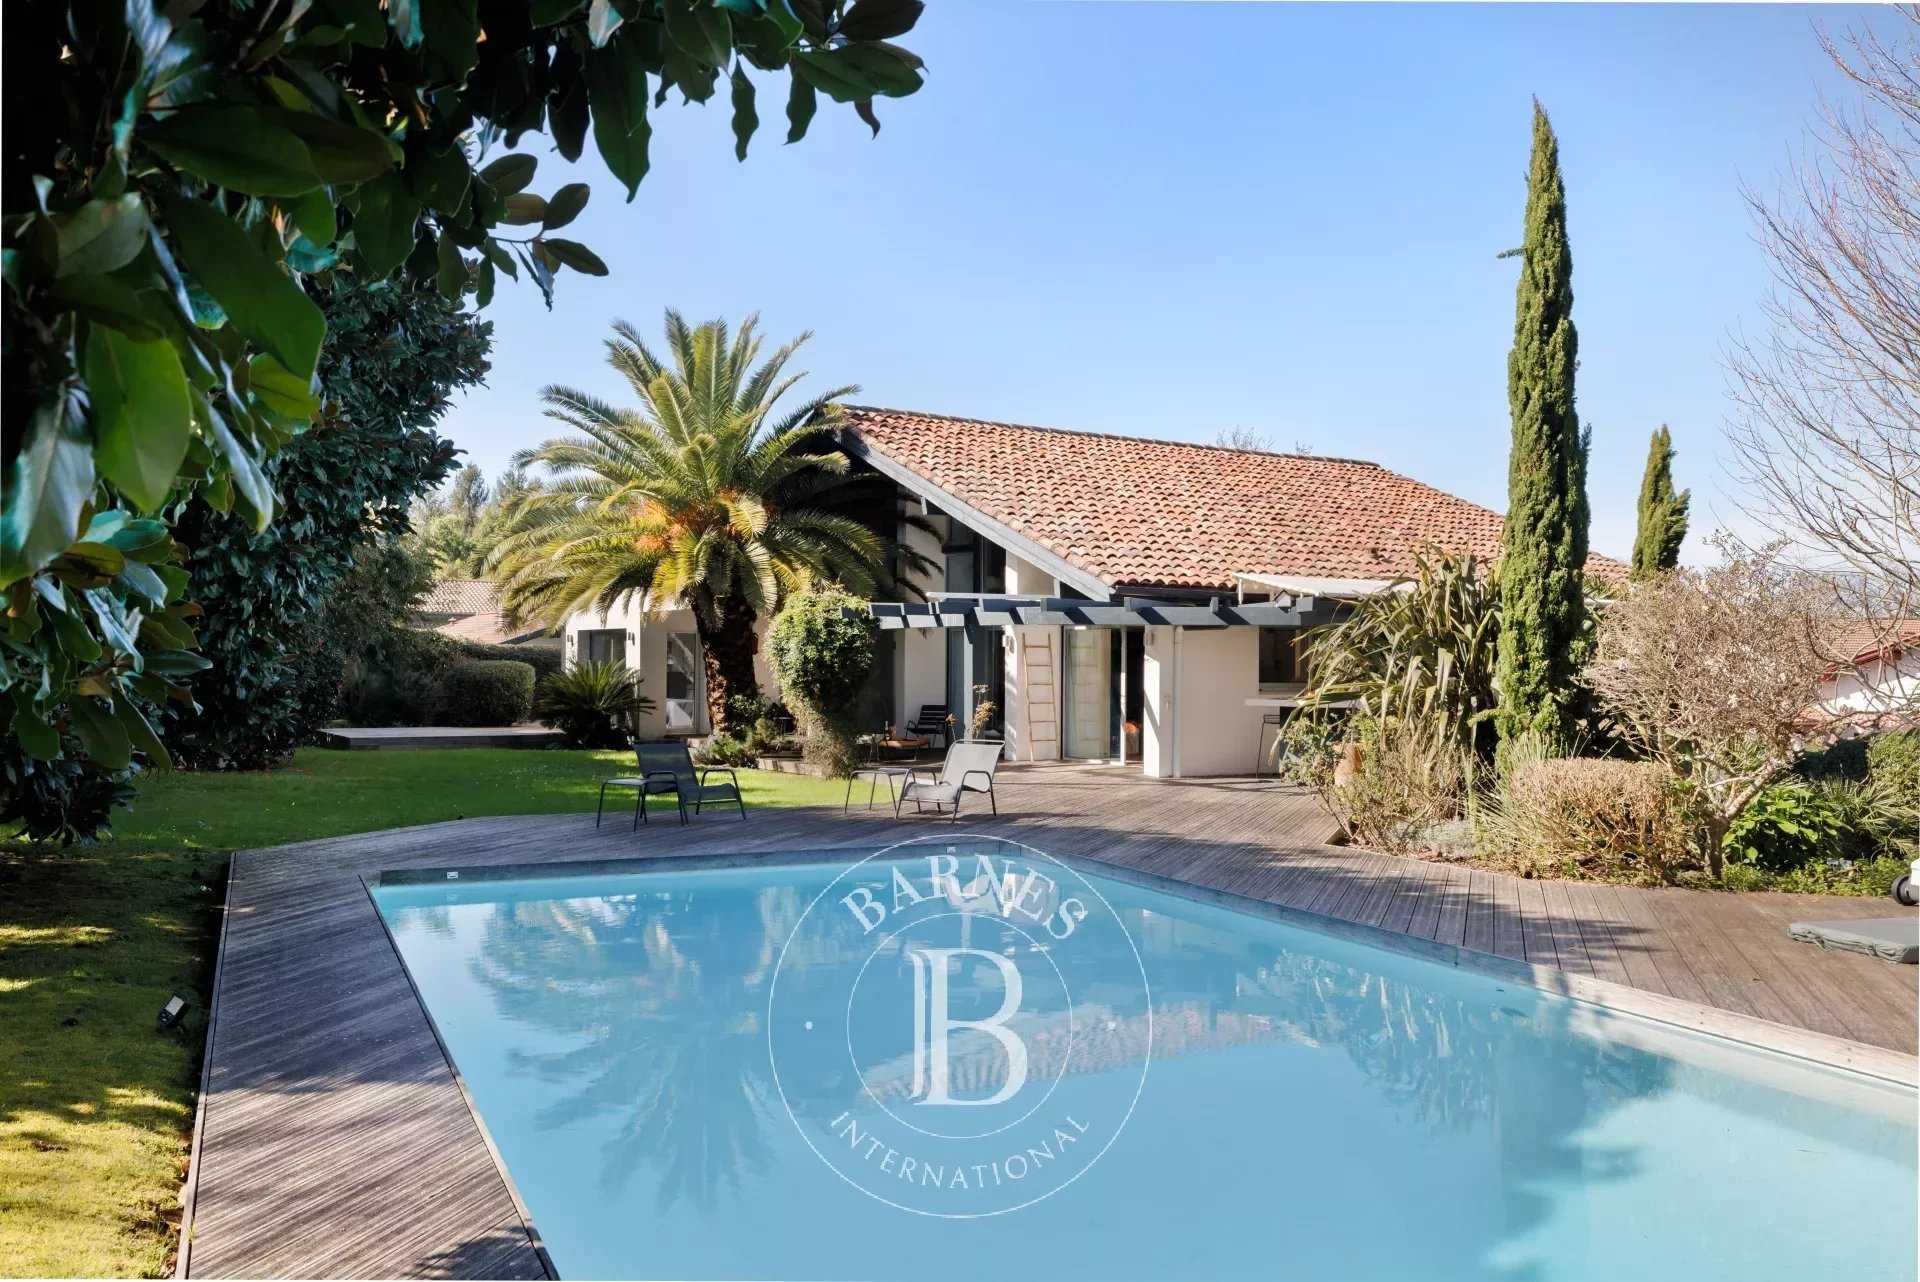 SIMONE - Renovated family villa, tastefully decorated, heated pool - 4 bedrooms & 3 bathrooms - Biarritz picture 20